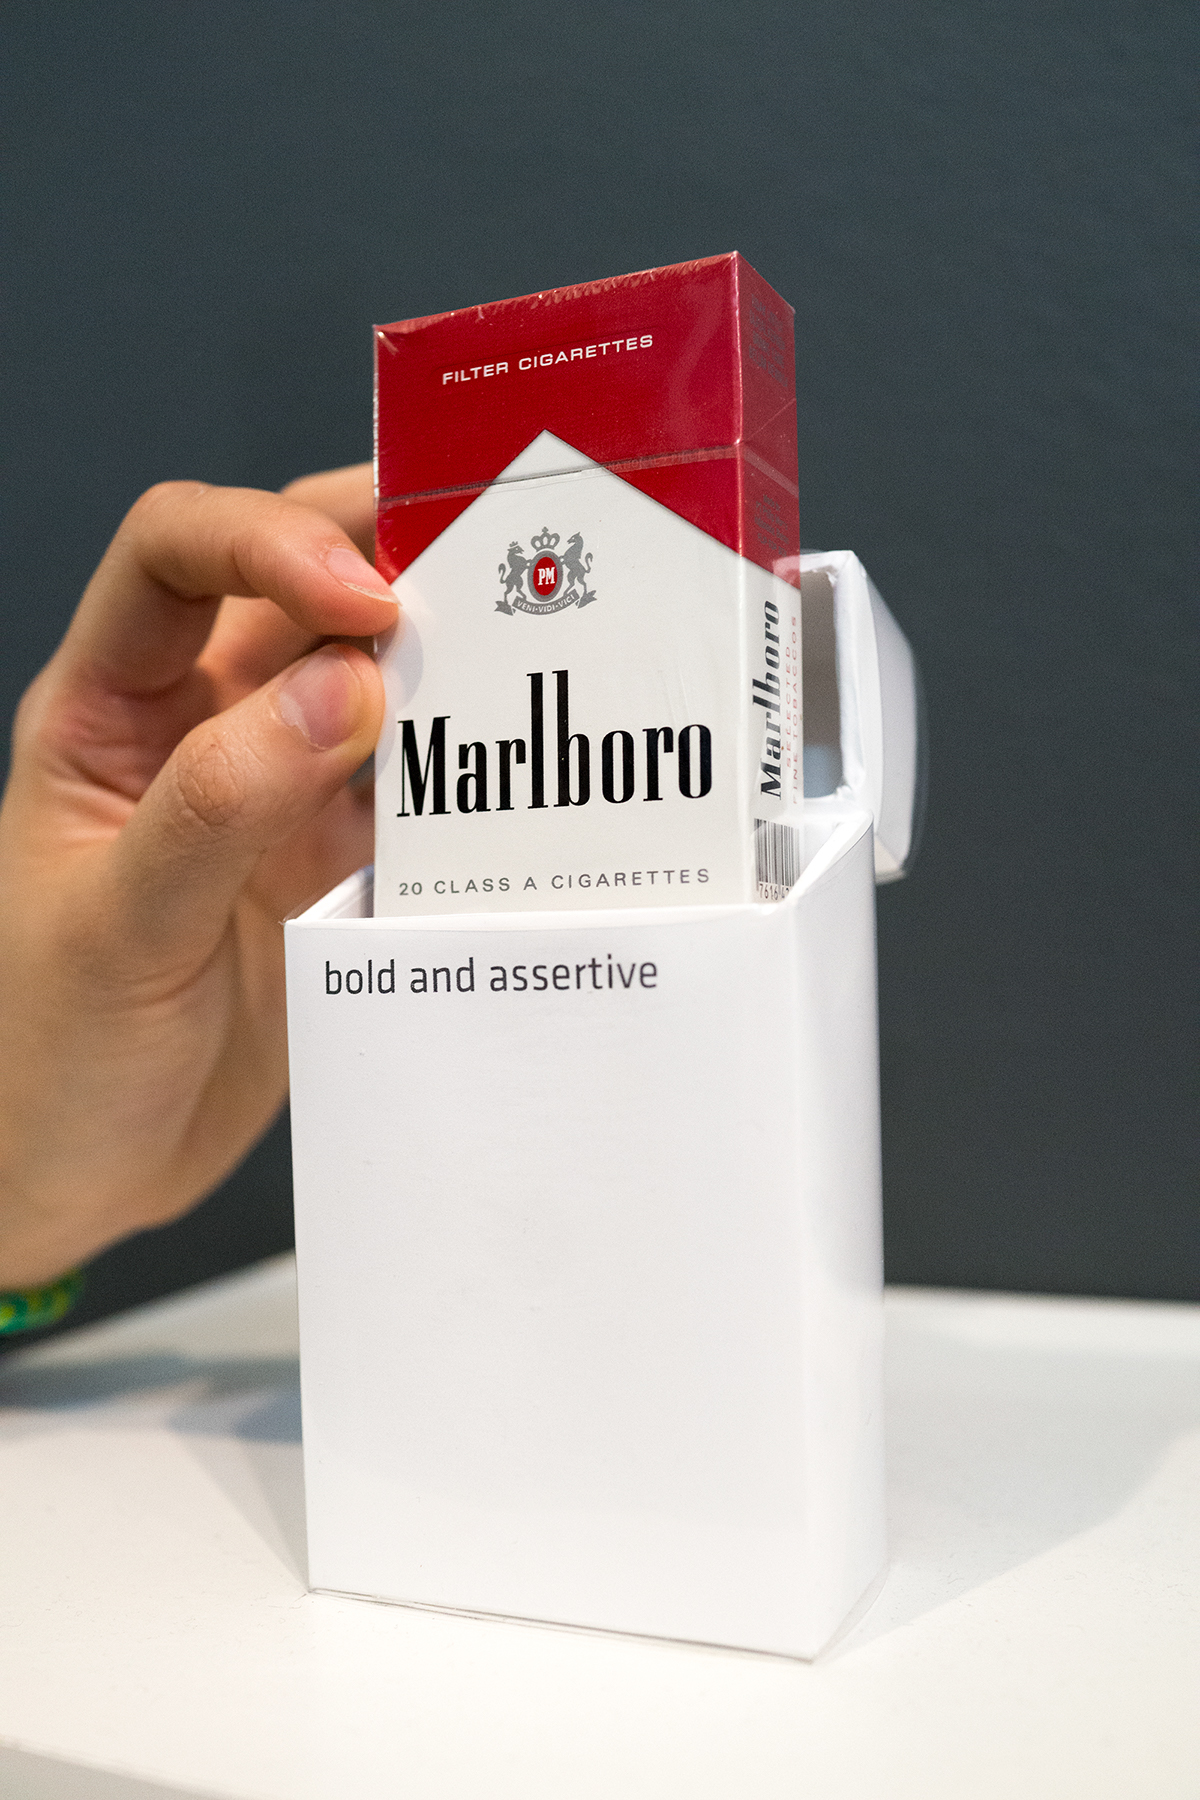 Design Aspirations Contemporary Cigarette Packaging Thesis Project installation cigarettes brands conceptual